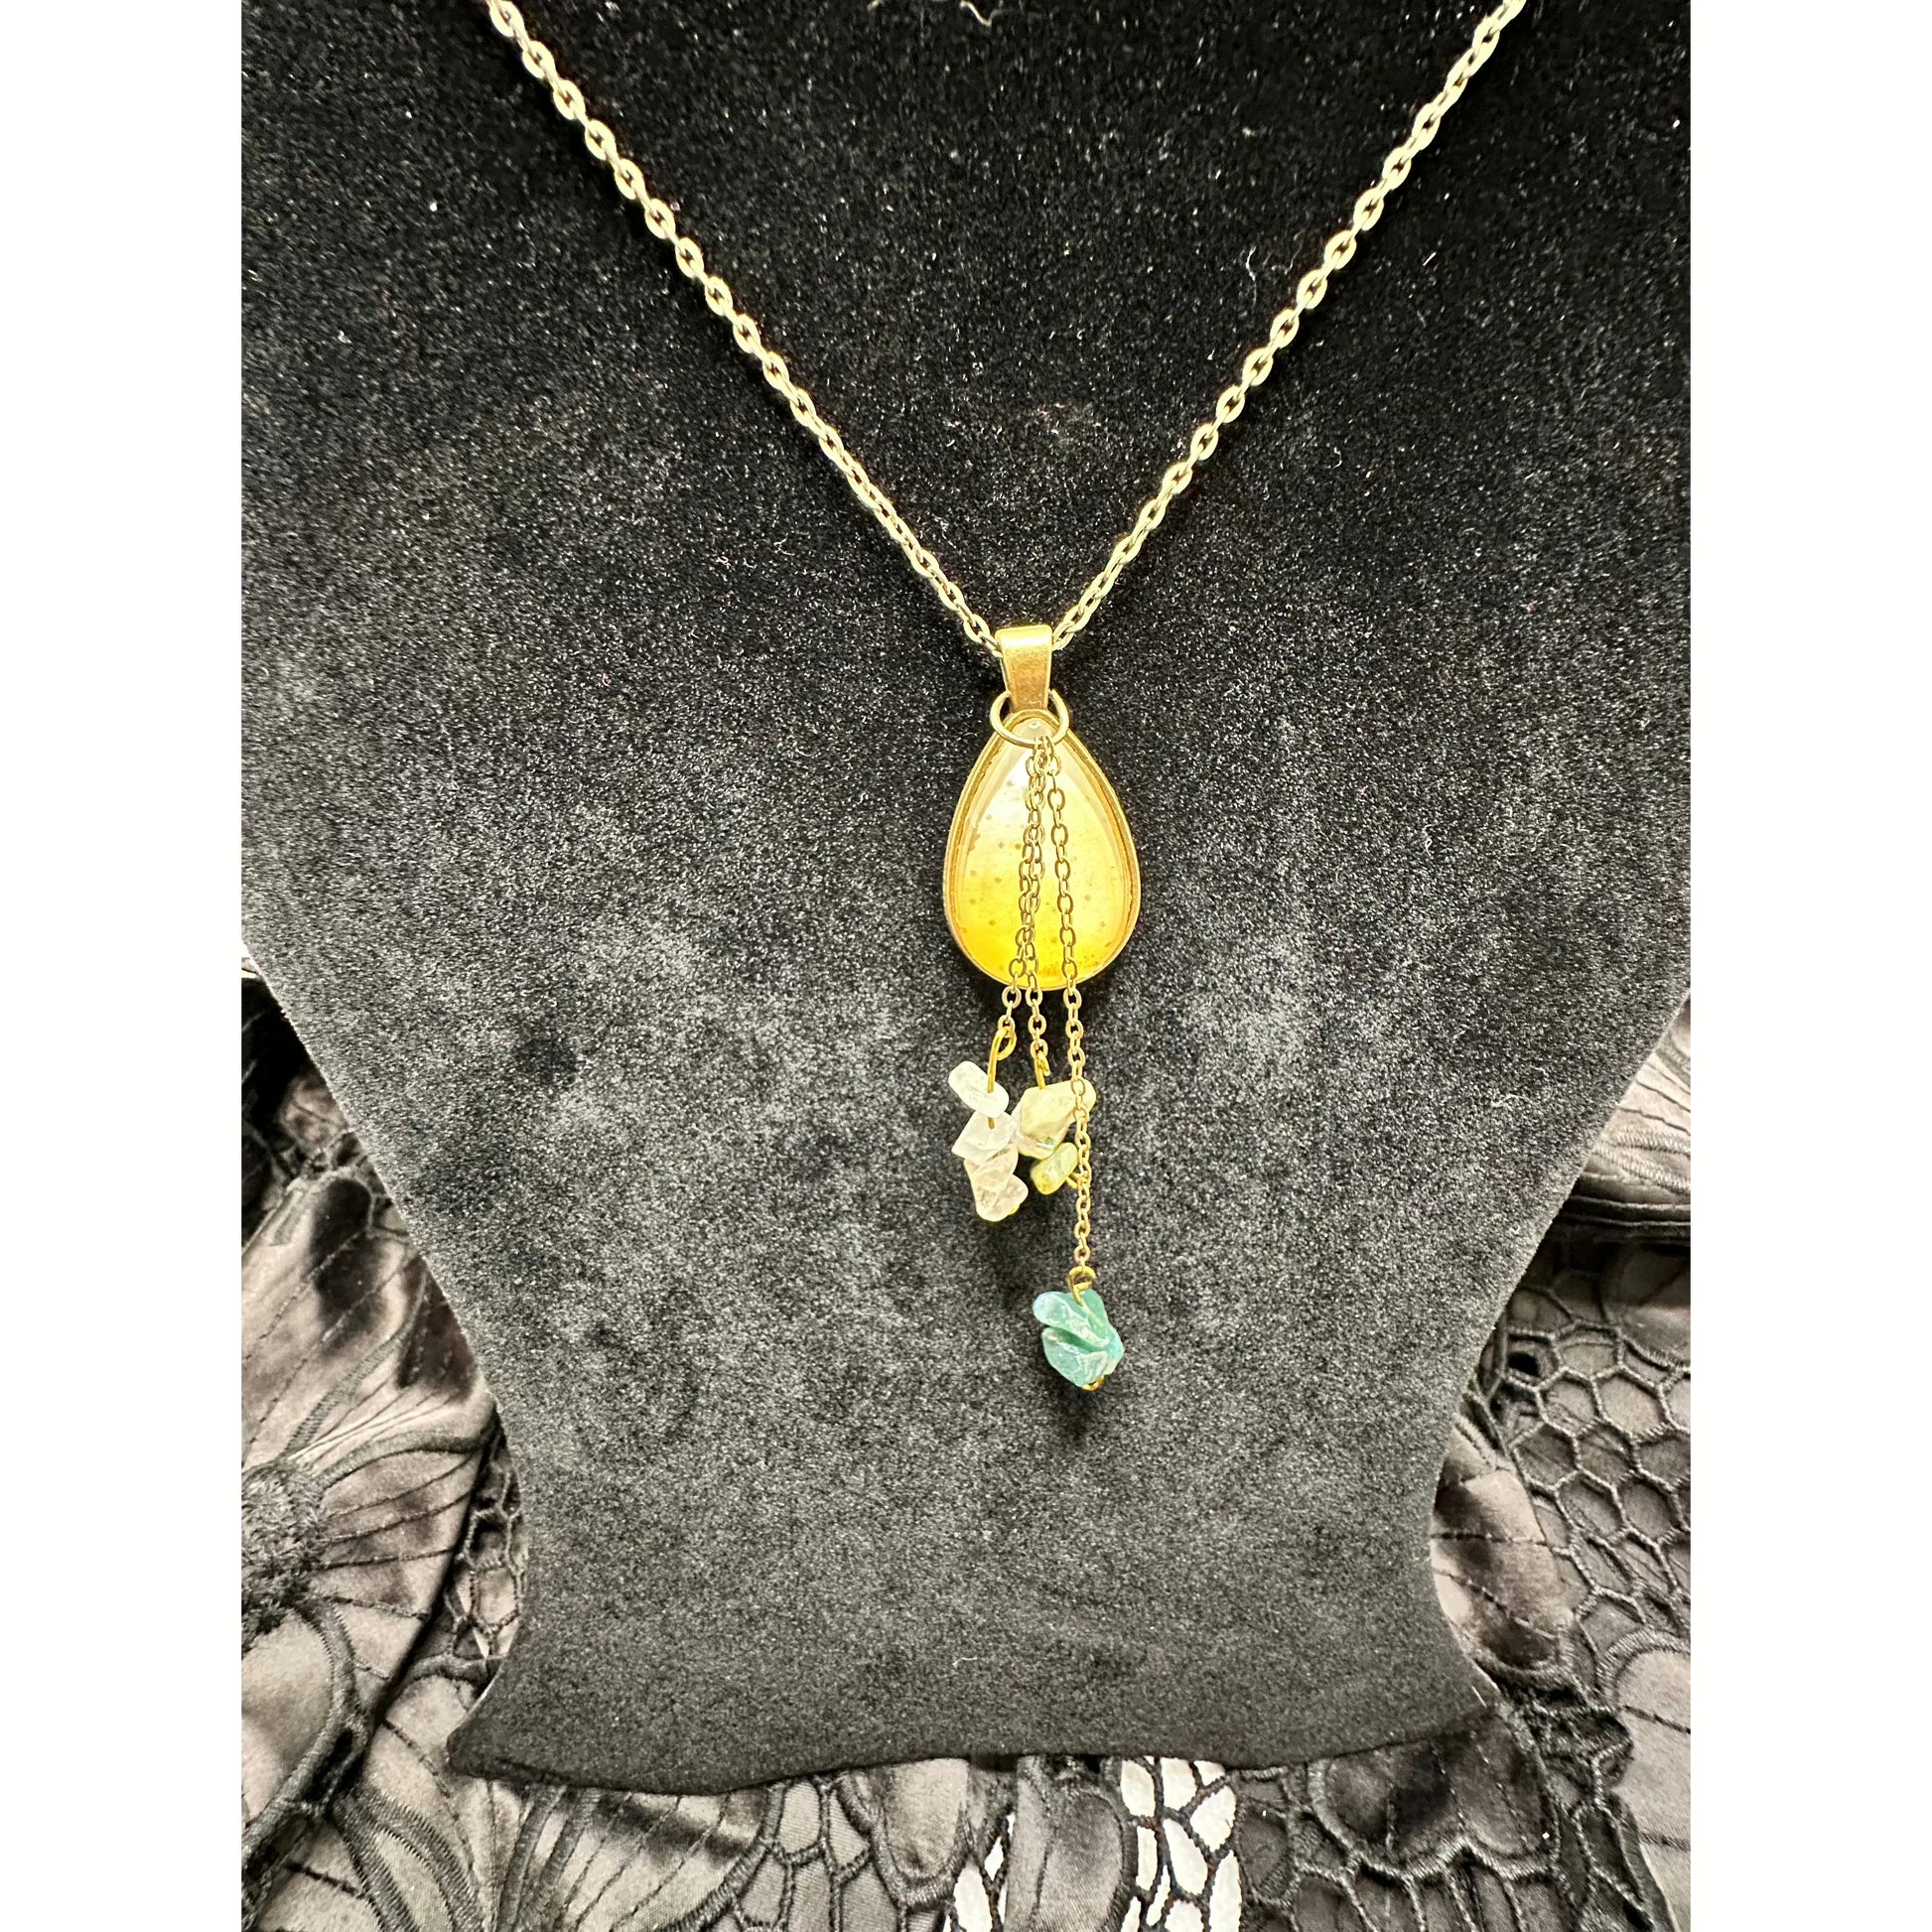 Dewdrop 1 Pendant Necklace - Rhapsody and Renascence